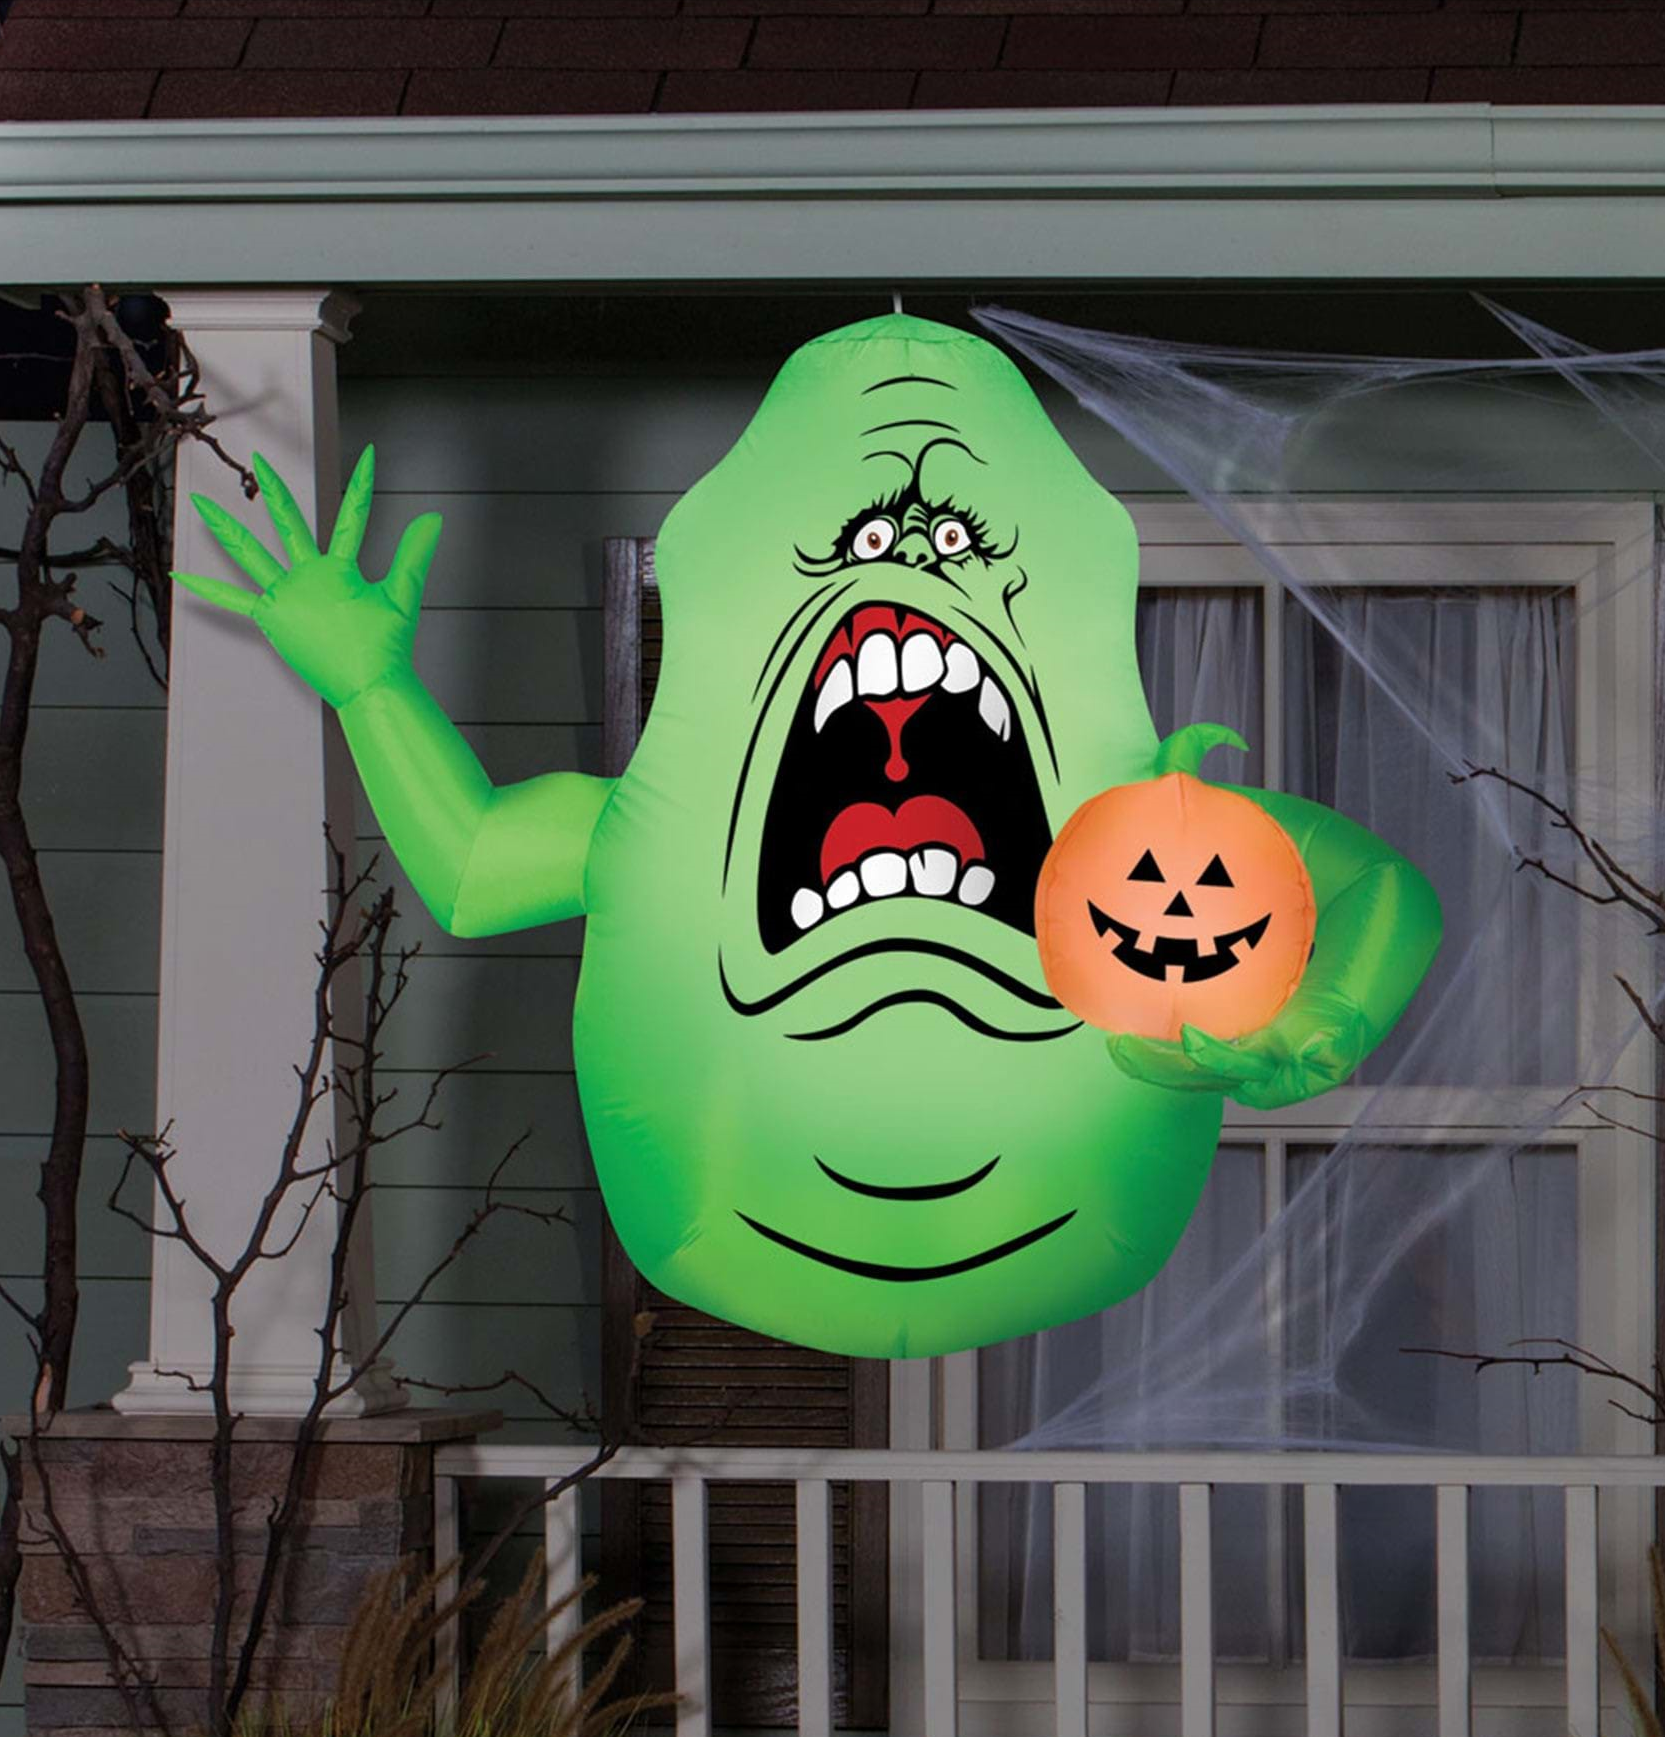 Ghostbusters Outdoor Decorations, Halloween Yard Decor - 49 Inch Medium Airblown Hanging Slimer Ghost with Pumpkin Inflatable